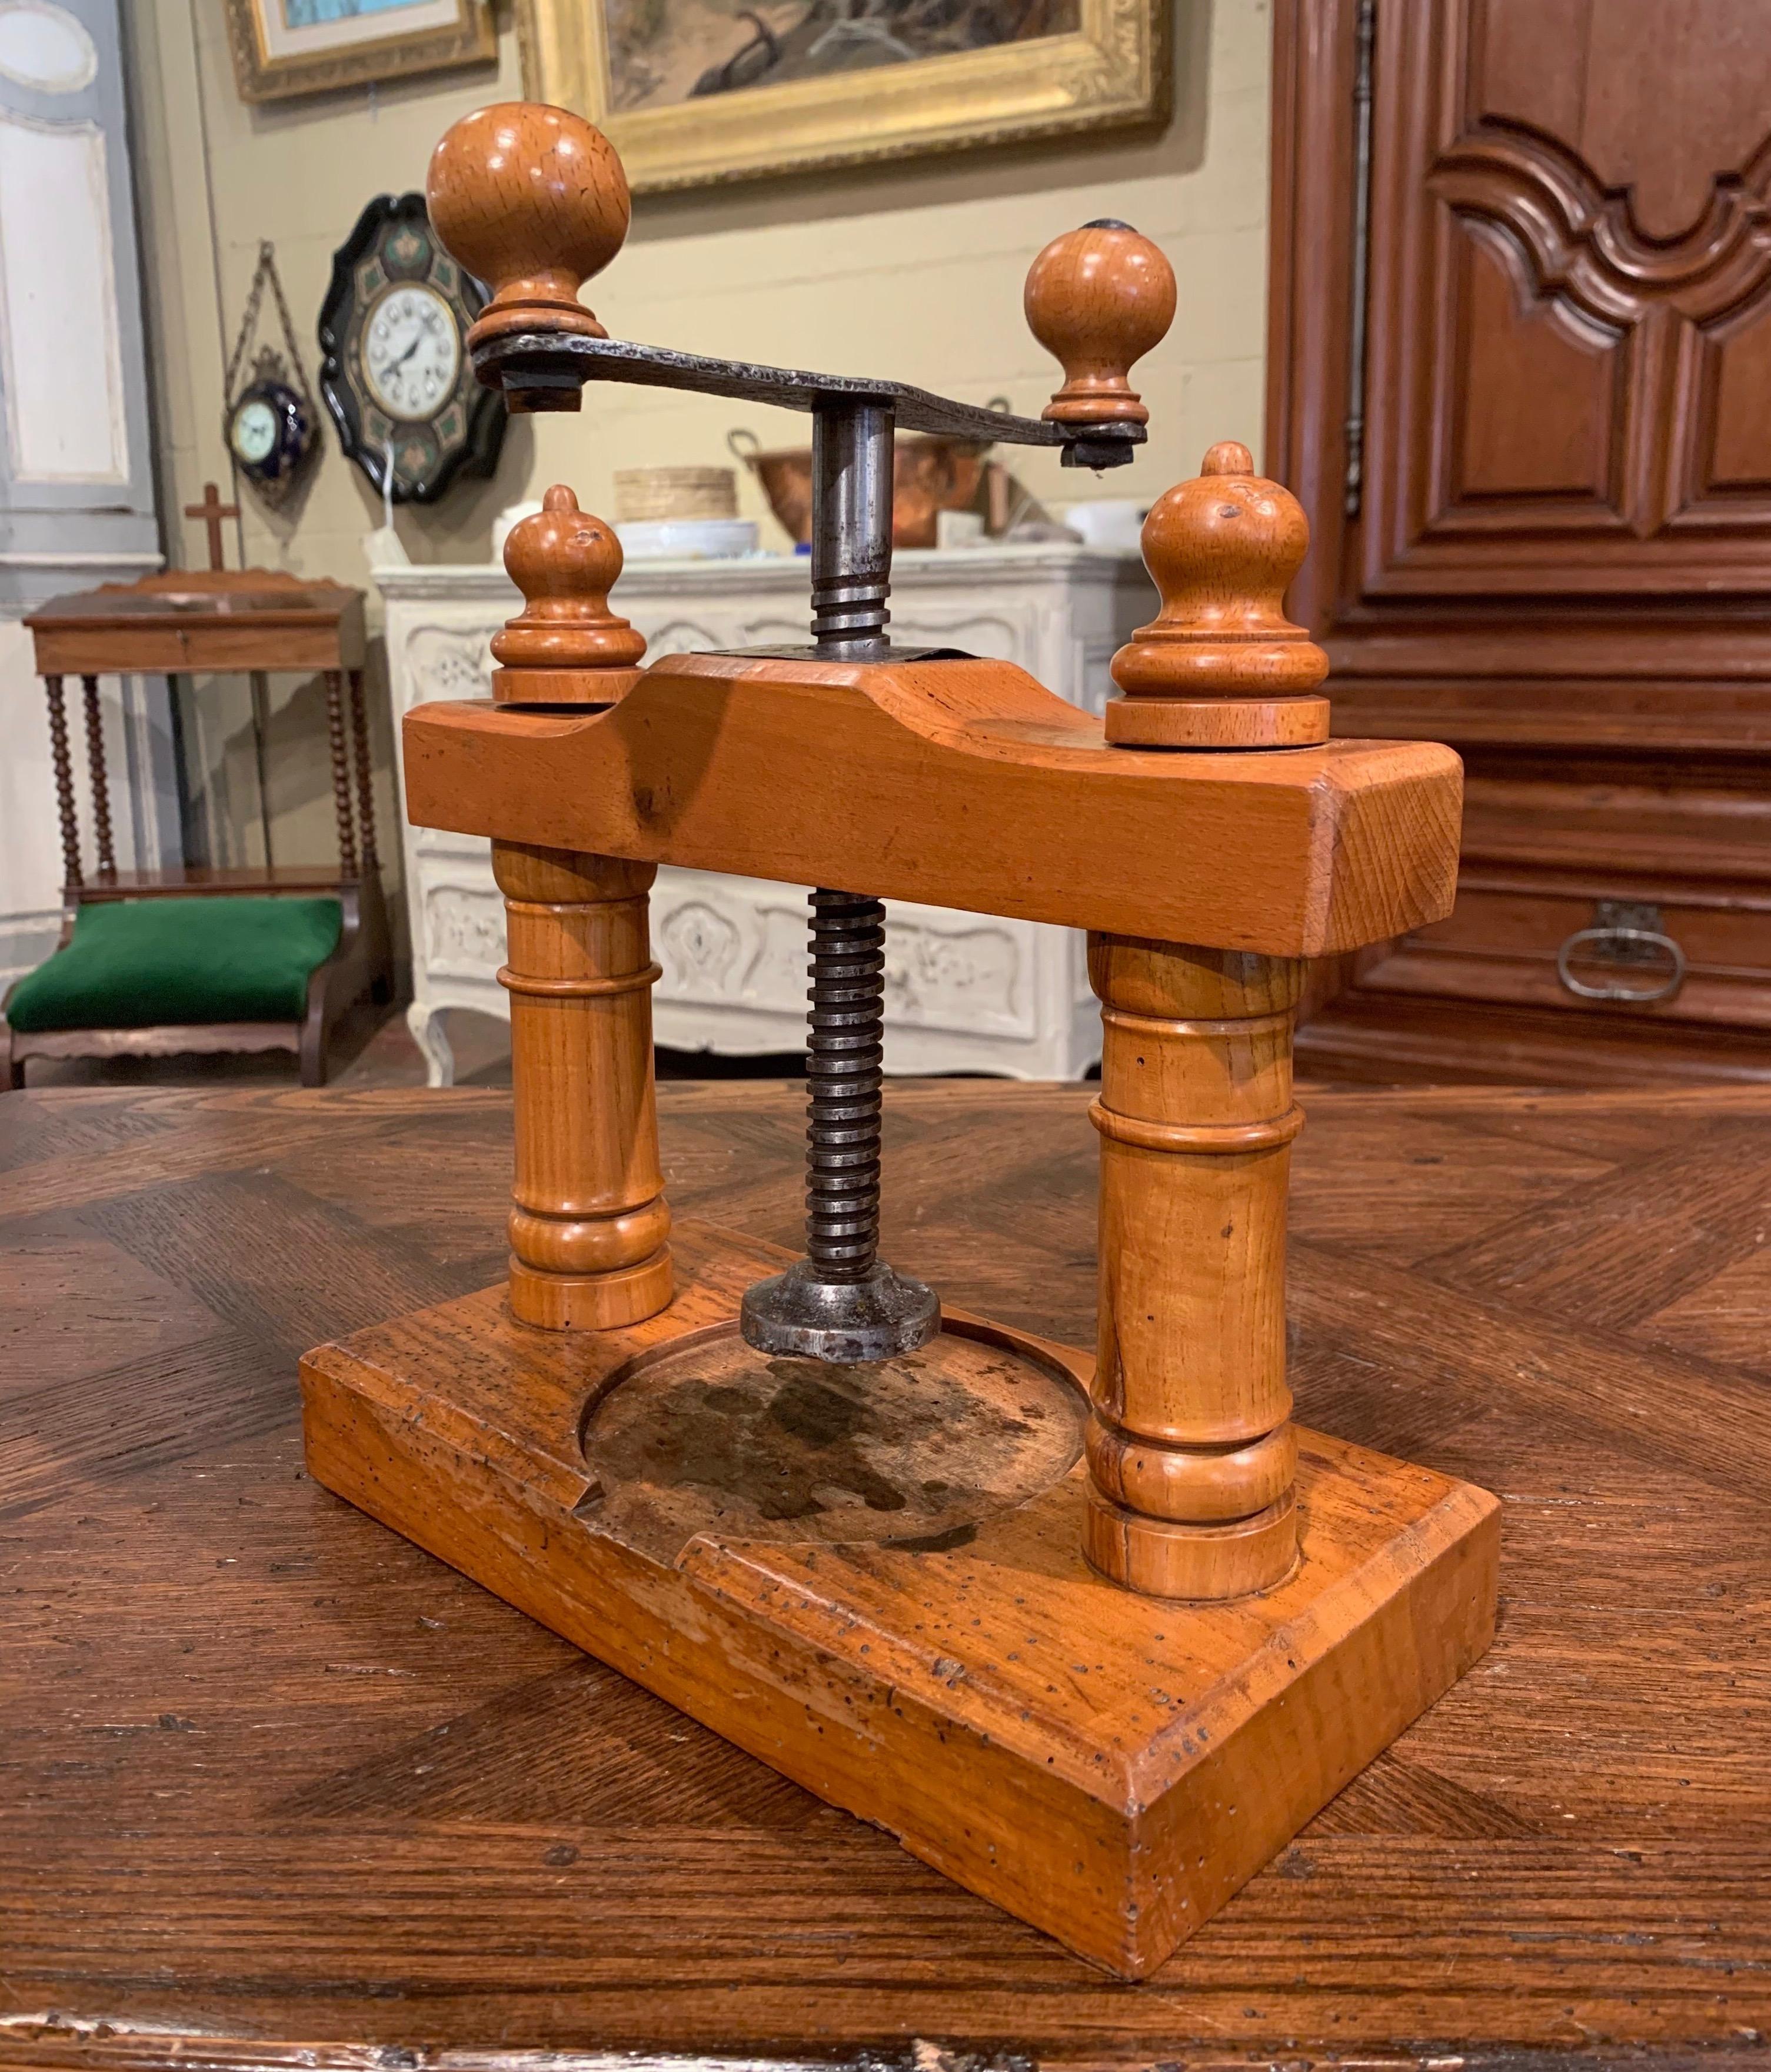 Decorate a kitchen counter with this elegant antique press devise. Crafted in France circa 1880, the fruit wood utensil stands on a rectangular base and features a iron twist screw with top handle to press either fruit or cheese. The piece is in